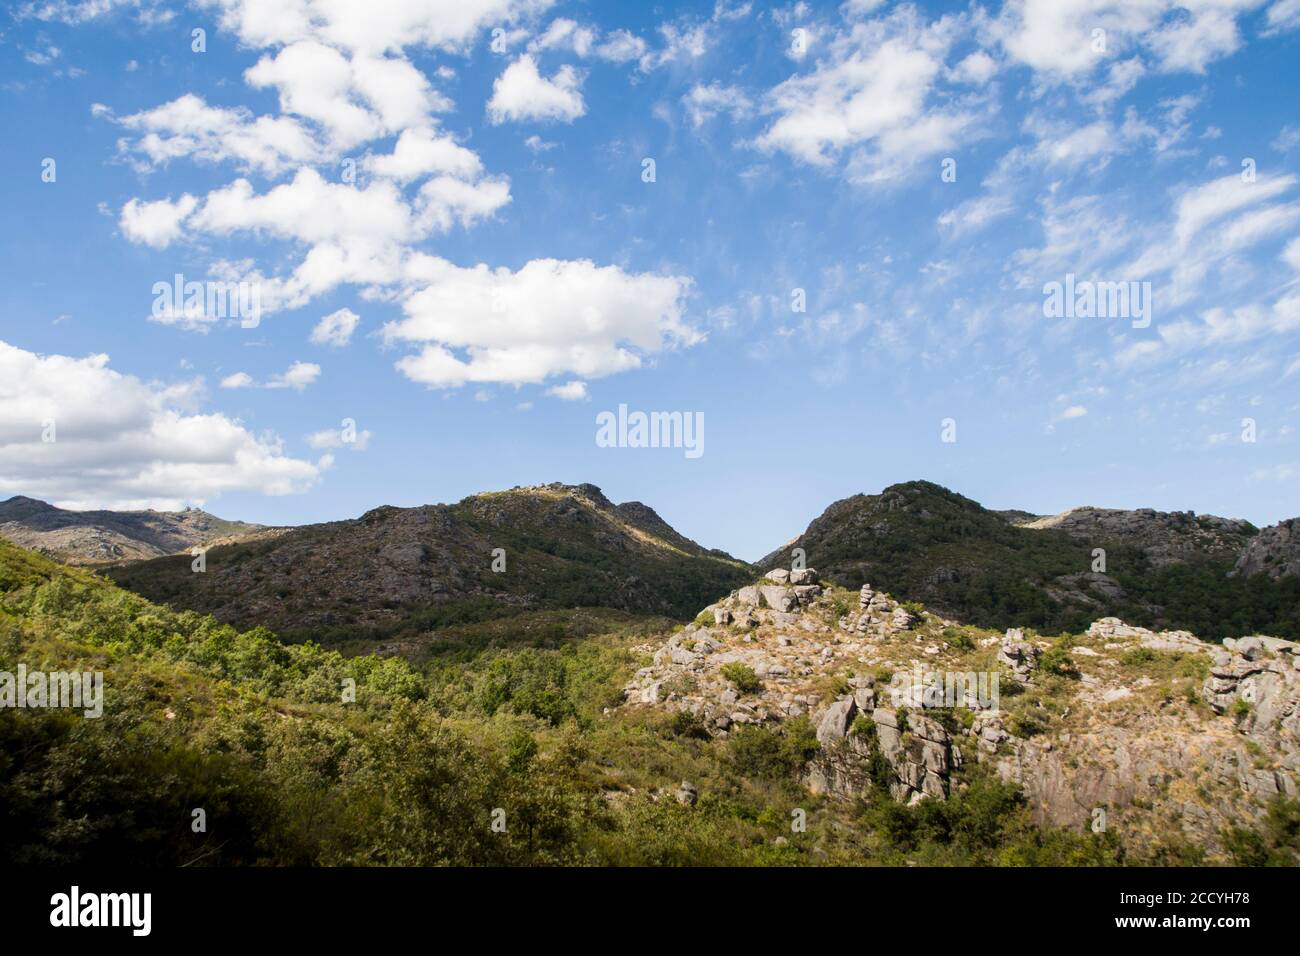 Mountain stone peaks stand uphill under a bright blue sky with white clouds hanging above Stock Photo